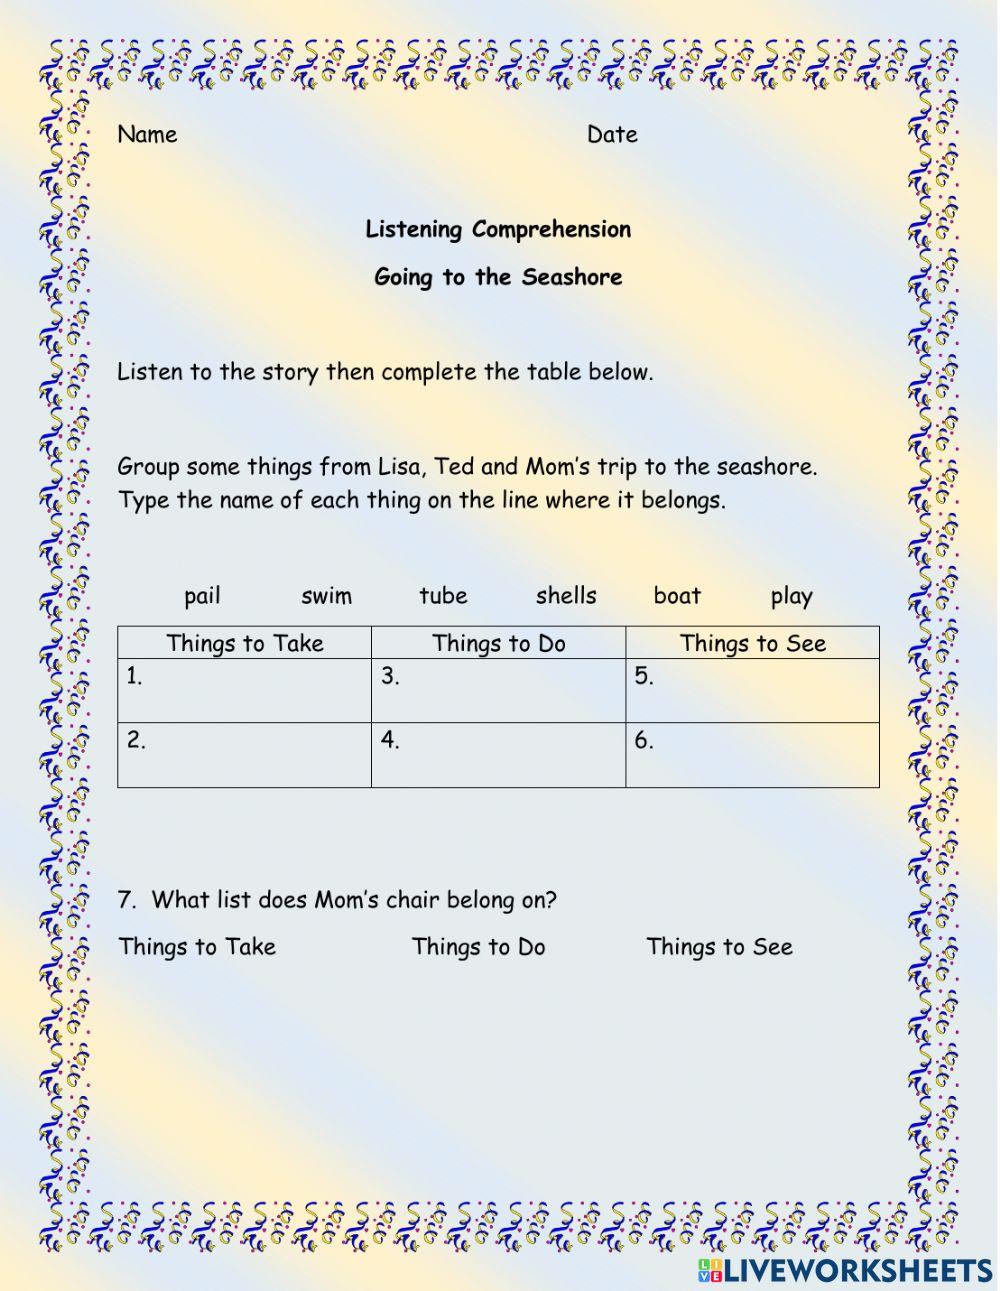 Listening Comprehension Classifying